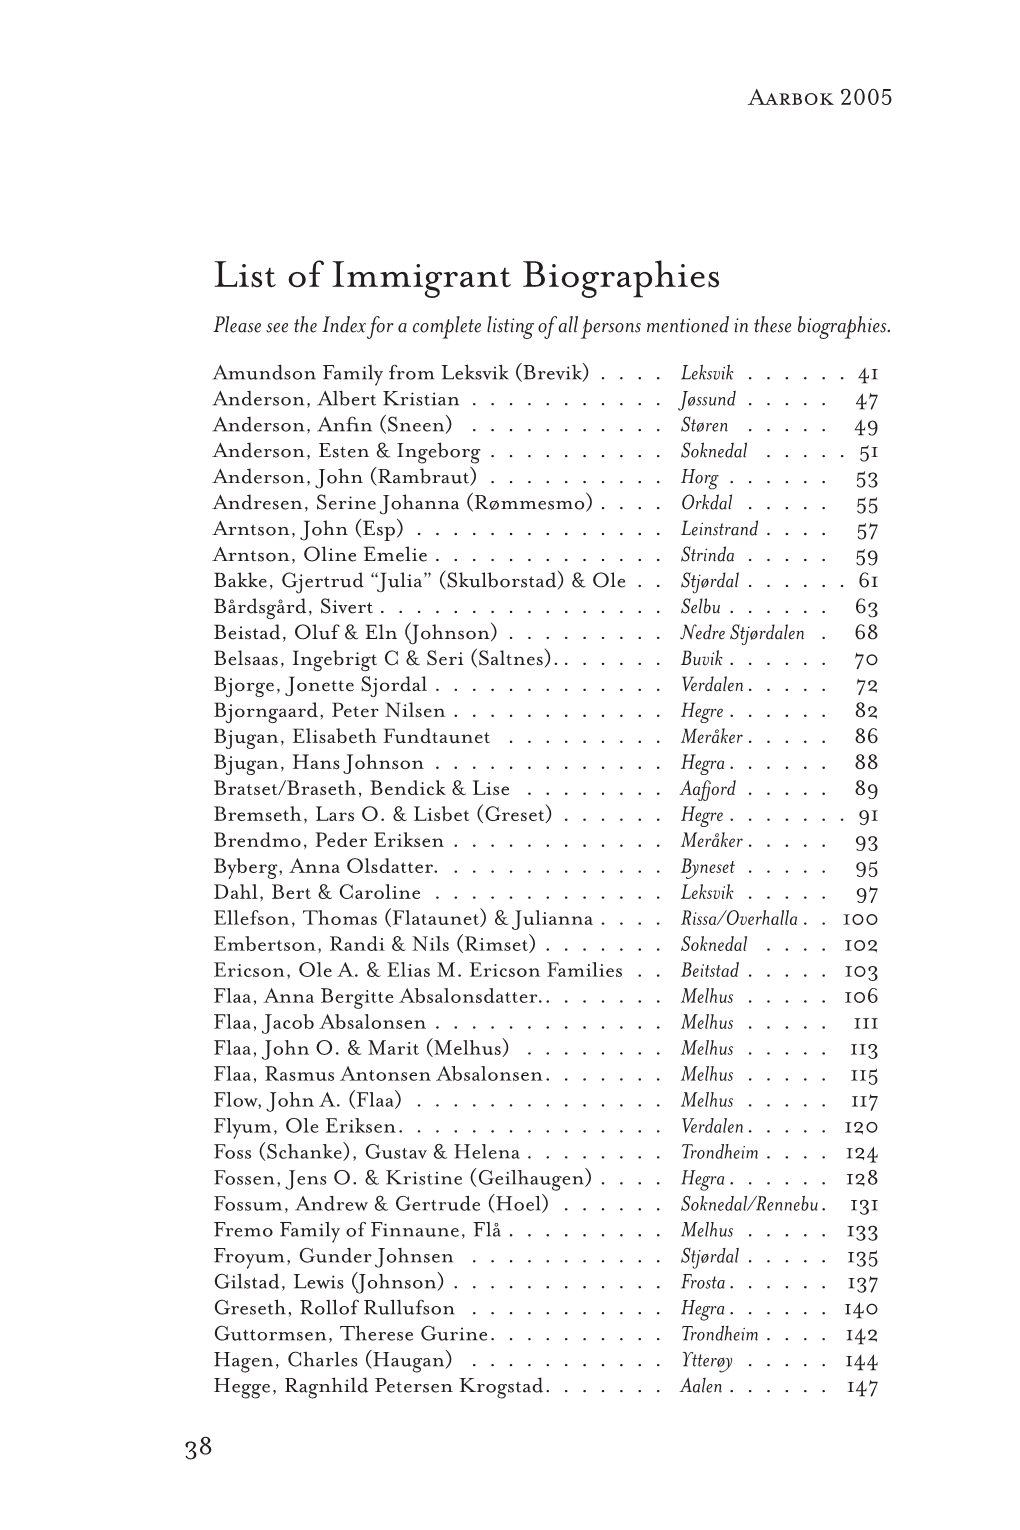 List of Immigrant Biographies Please See the Index for a Complete Listing of All Persons Mentioned in These Biographies